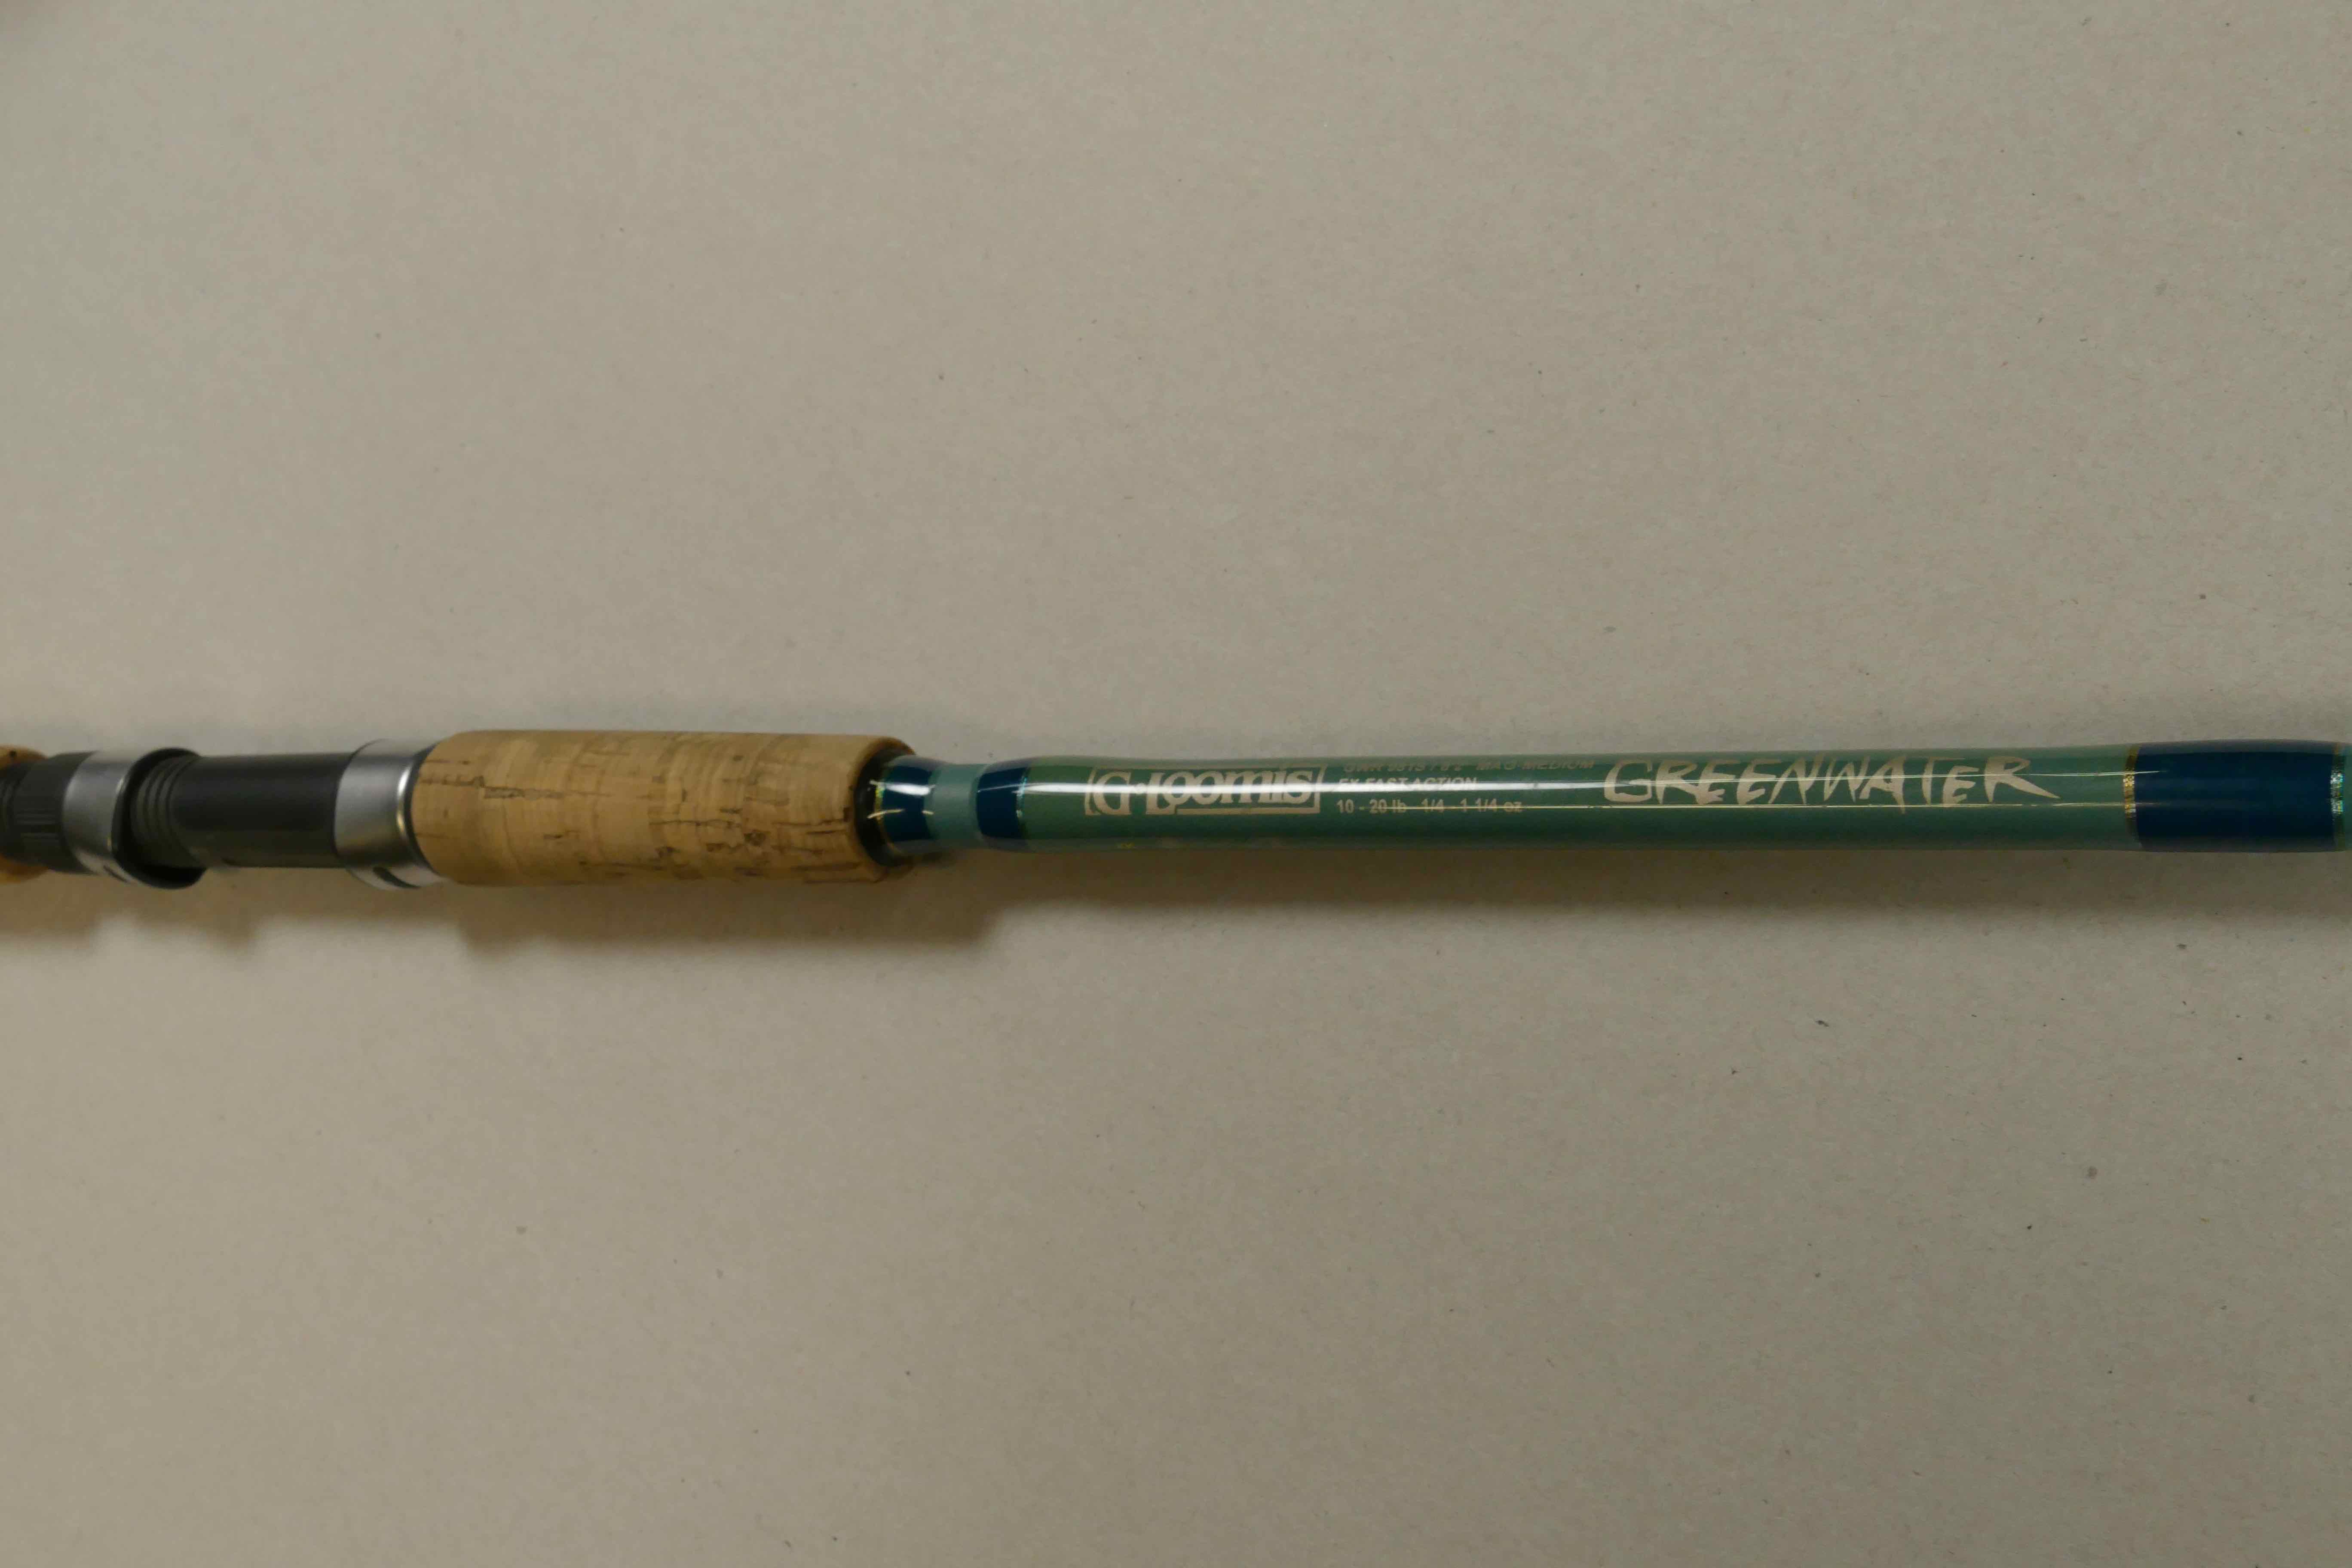 G. Loomis Greenwater 8’ 2” mag-medium, 1 piece power spinning rod for 1/4 to 1 1/4 oz. lures. GWR981S 10899-01     $160.00